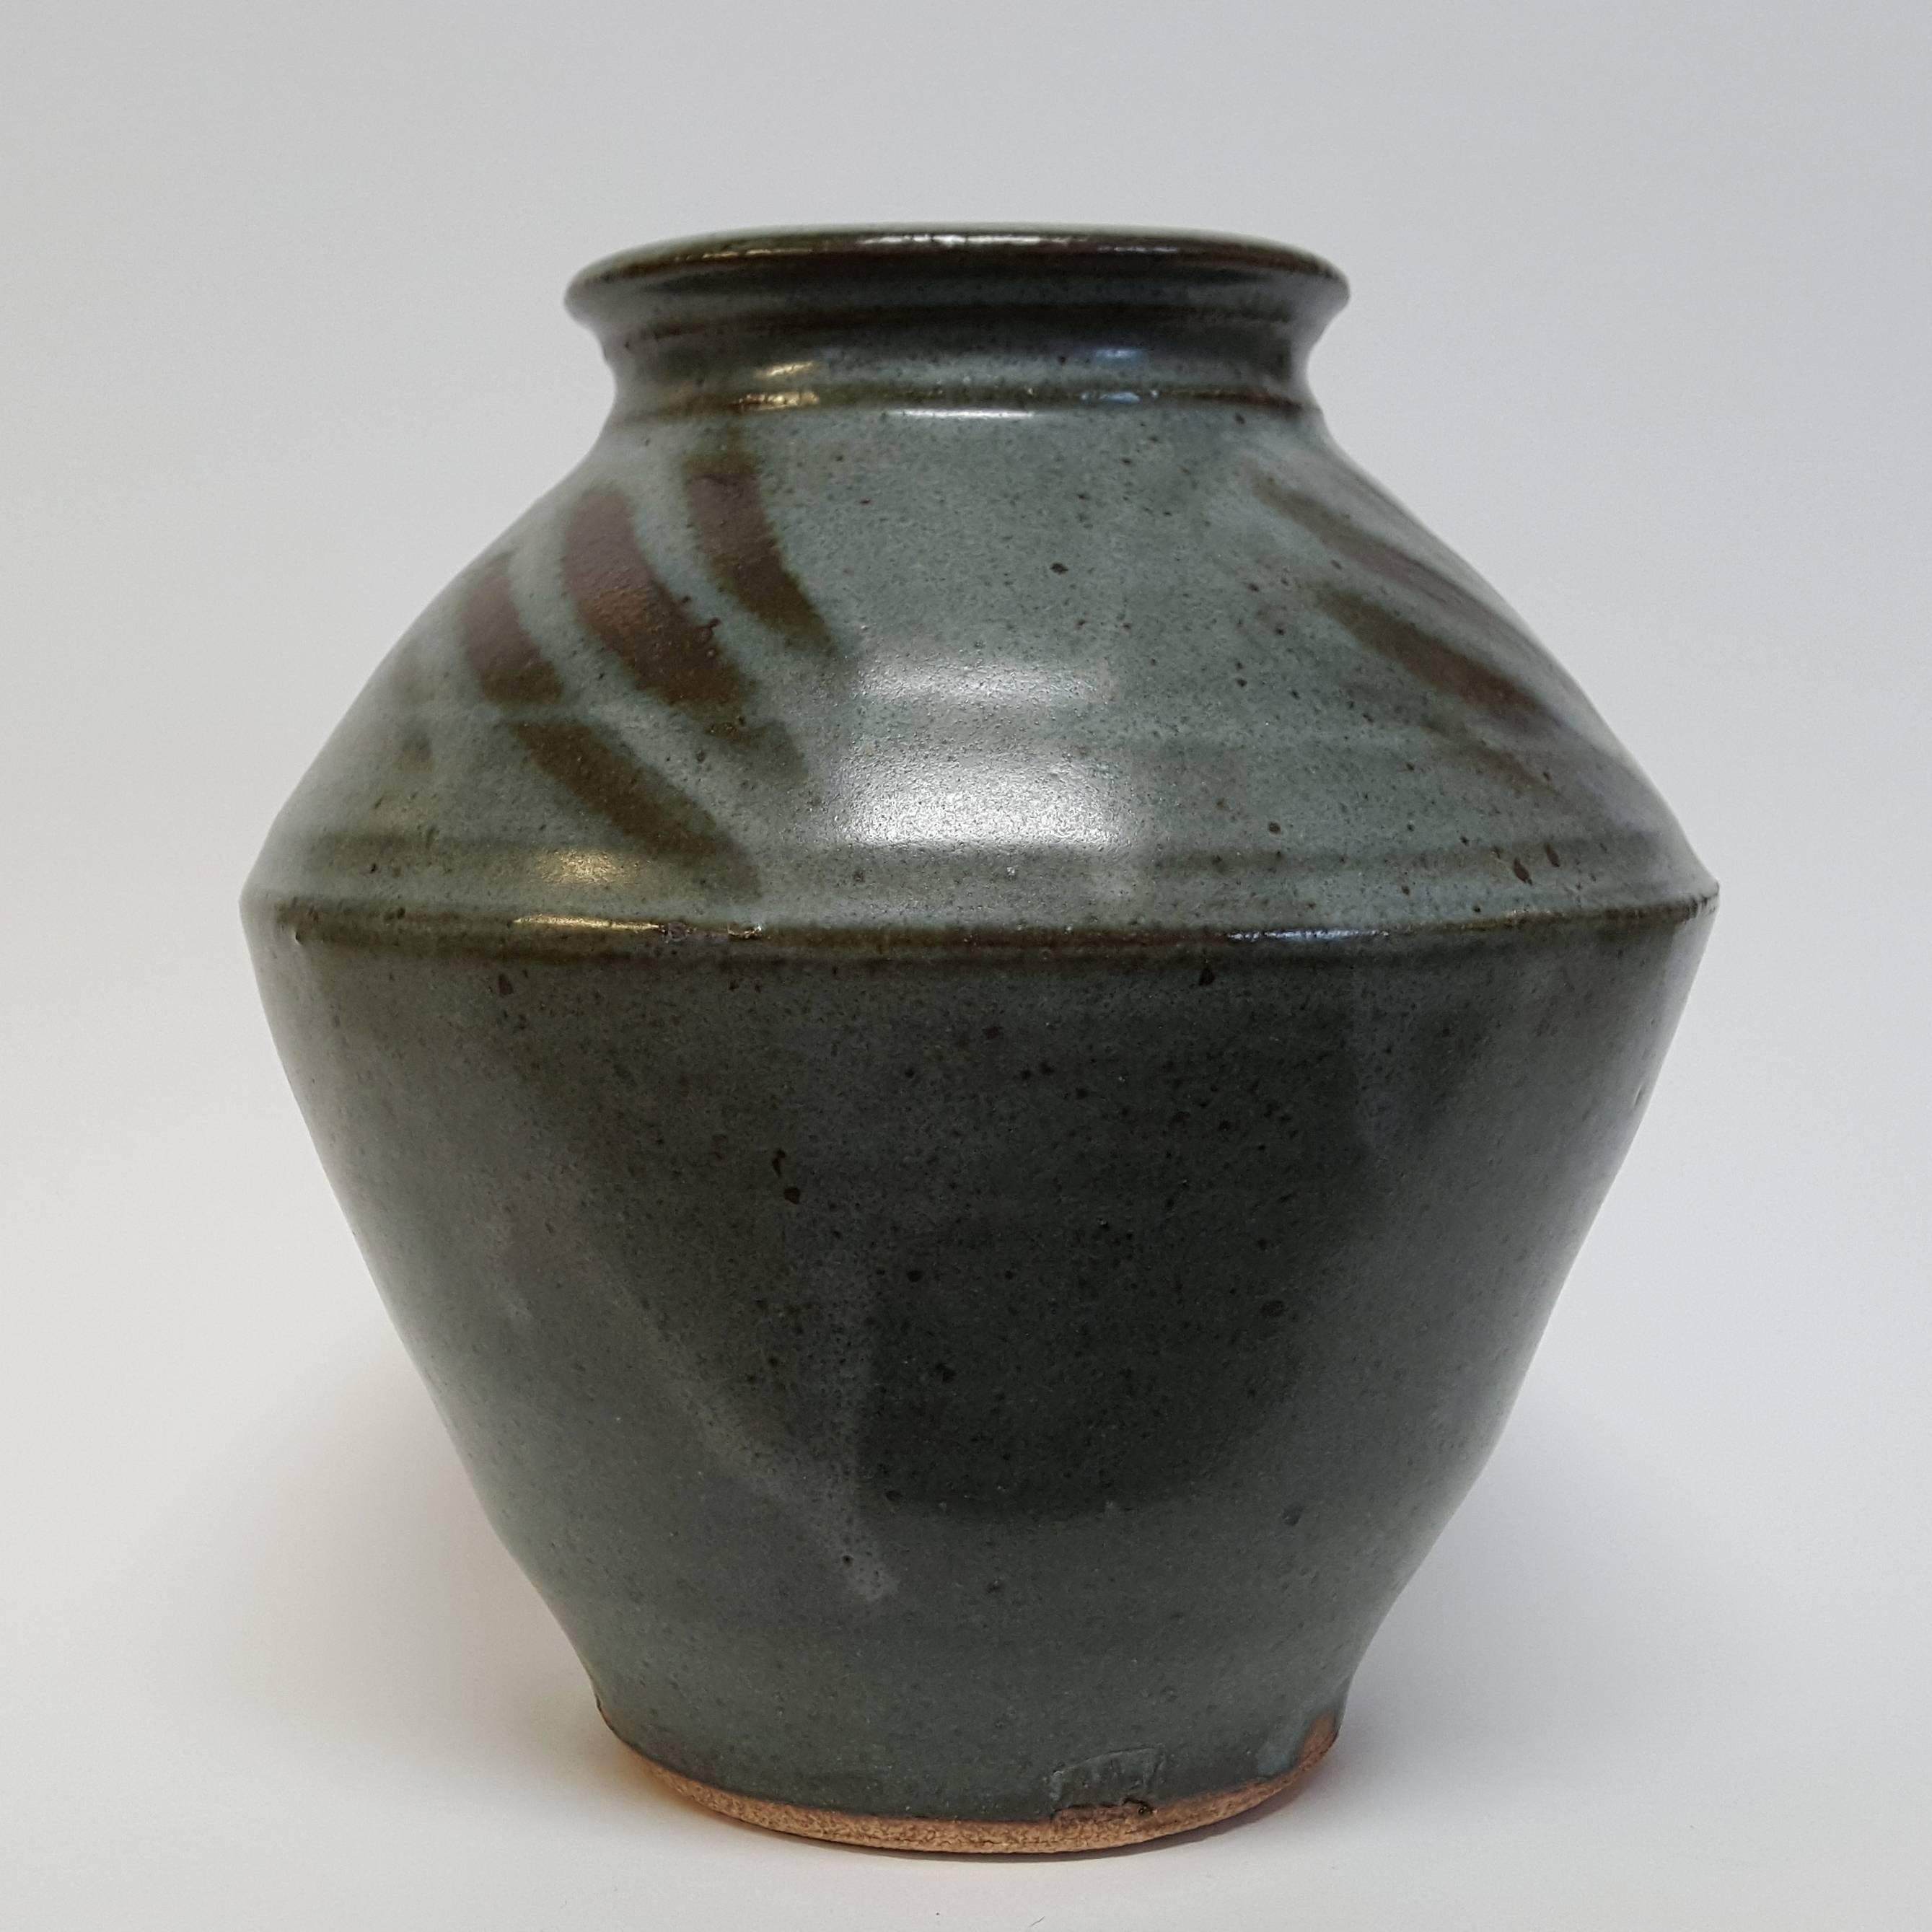 Warren MacKenzie (born 1924)
Blue vase with glaze decoration, n.d.
Stoneware
Measures: 7 x 7 inches
Artist’s stamp at base: M


MacKenzie's defining moment leading to his life's work began while he was a student at The Art Institute of